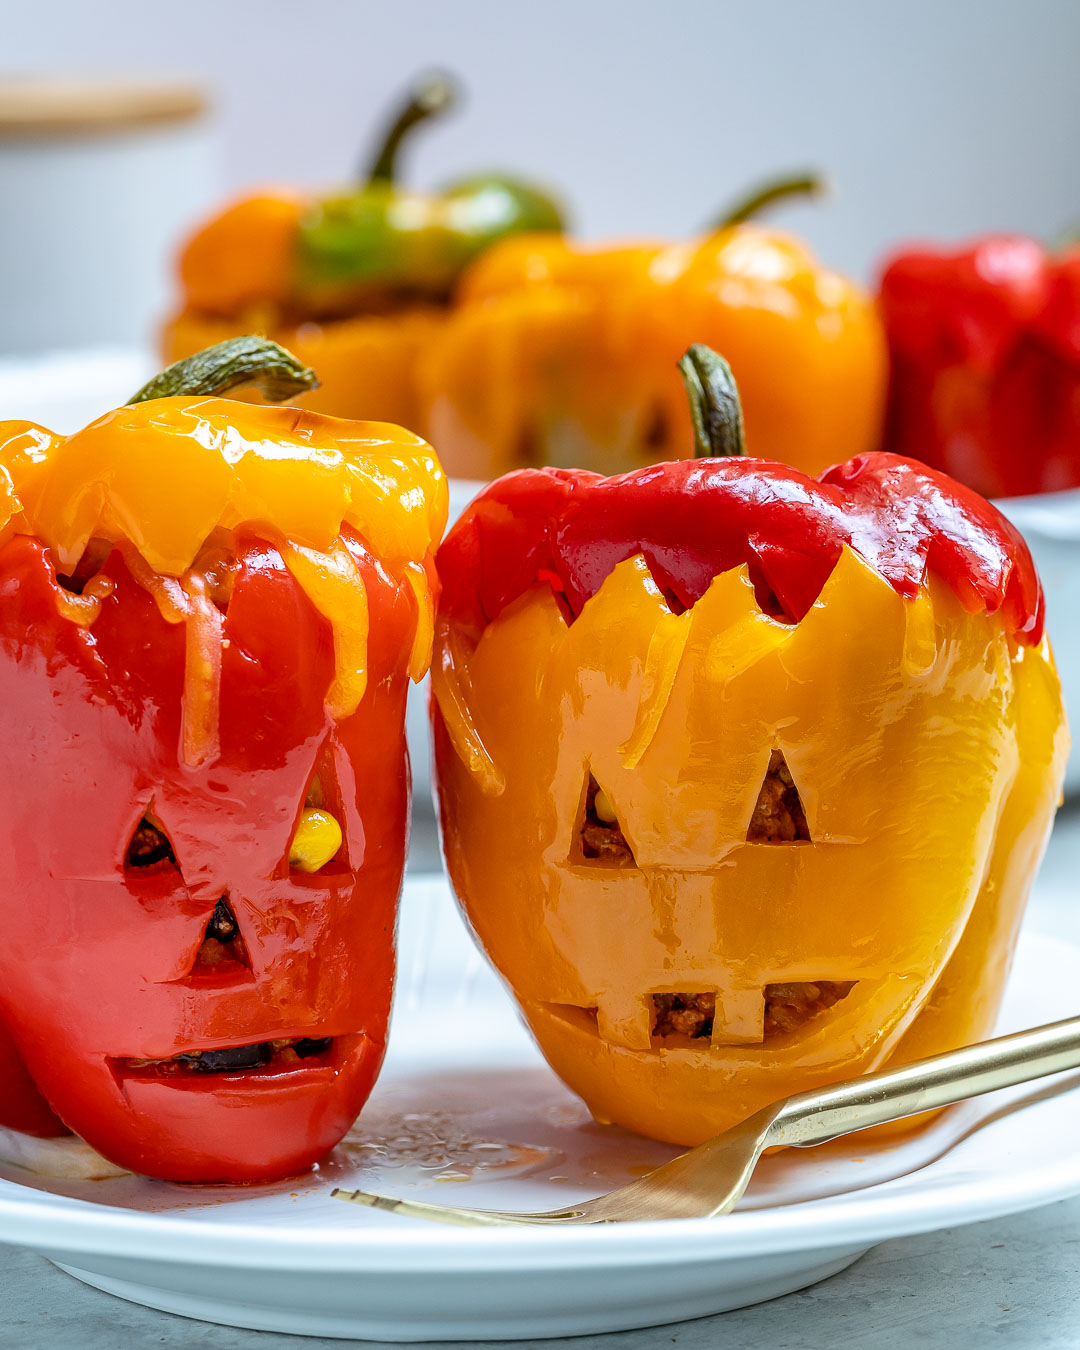 These Halloween Stuffed Peppers are the Cutest!